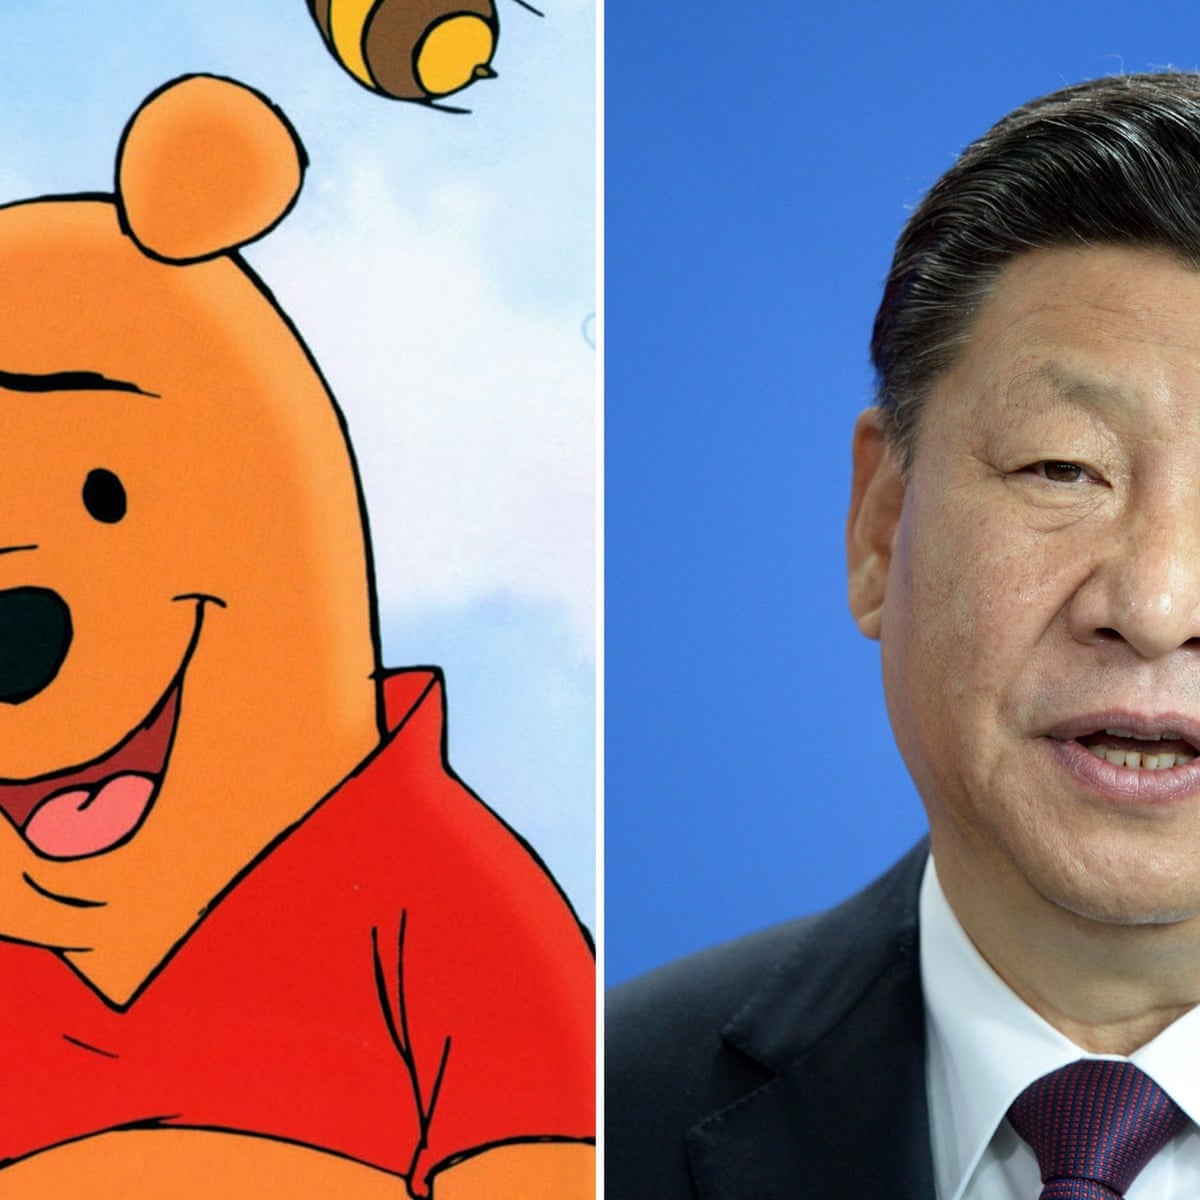 From Xinnie-the-Pooh to Putin as Dobby – world leaders and their cartoon  alter-egos | Politics | The Guardian